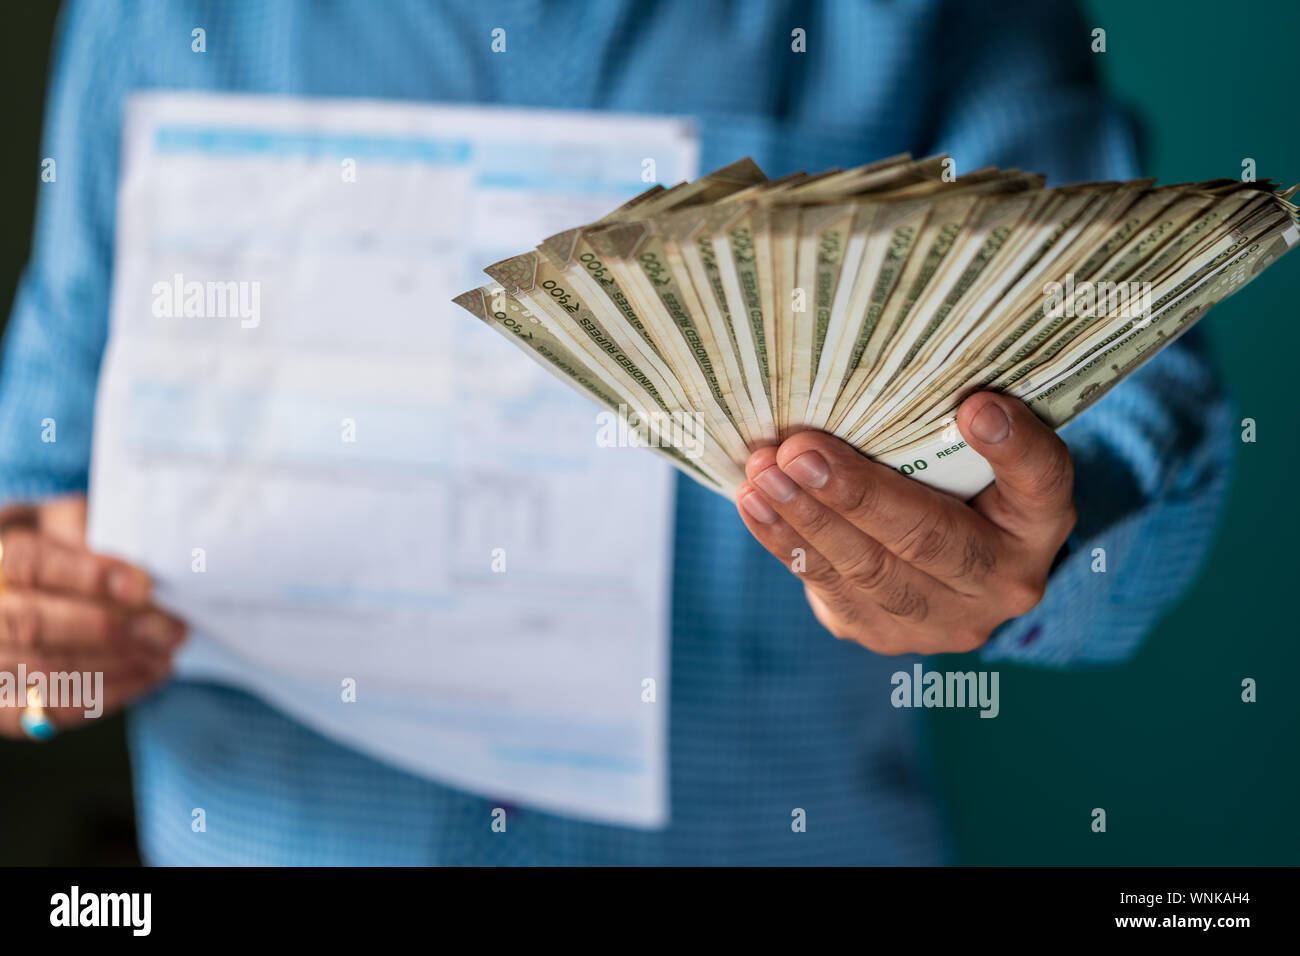 Indian male citizen paying his electricity, grocery, water, gas, DTH and other monthly bills and tax. Tax and bill payment concept with copyspace. Stock Photo